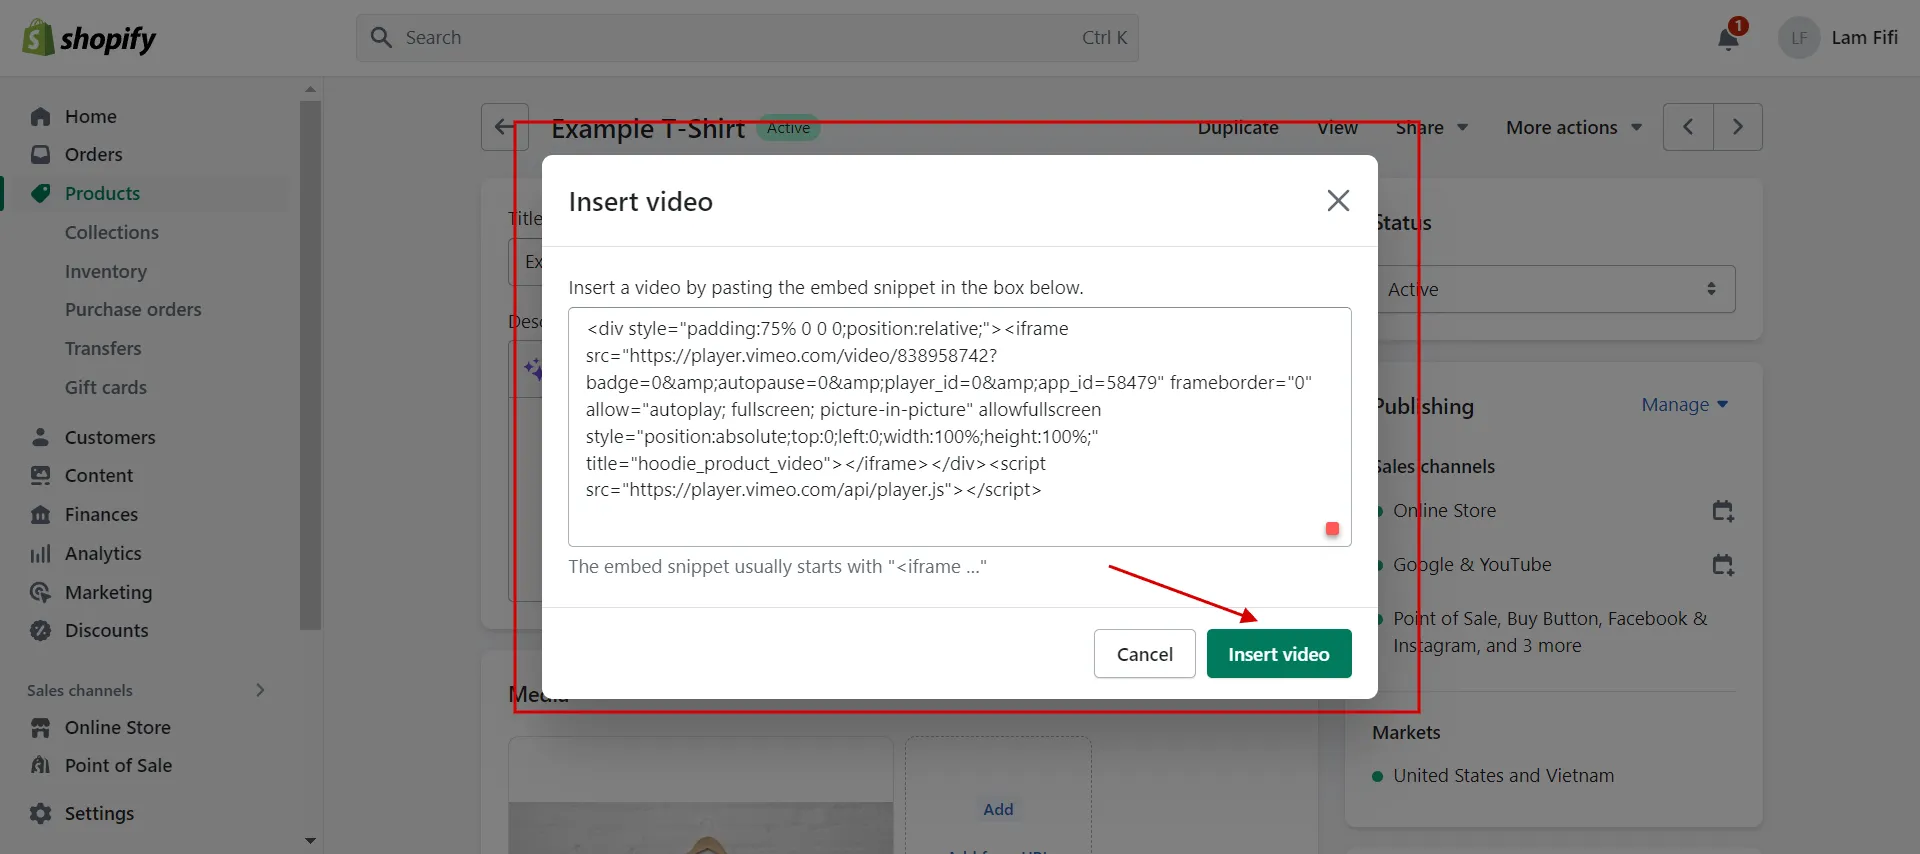 Copy and paste the Vimeo embed snippet code